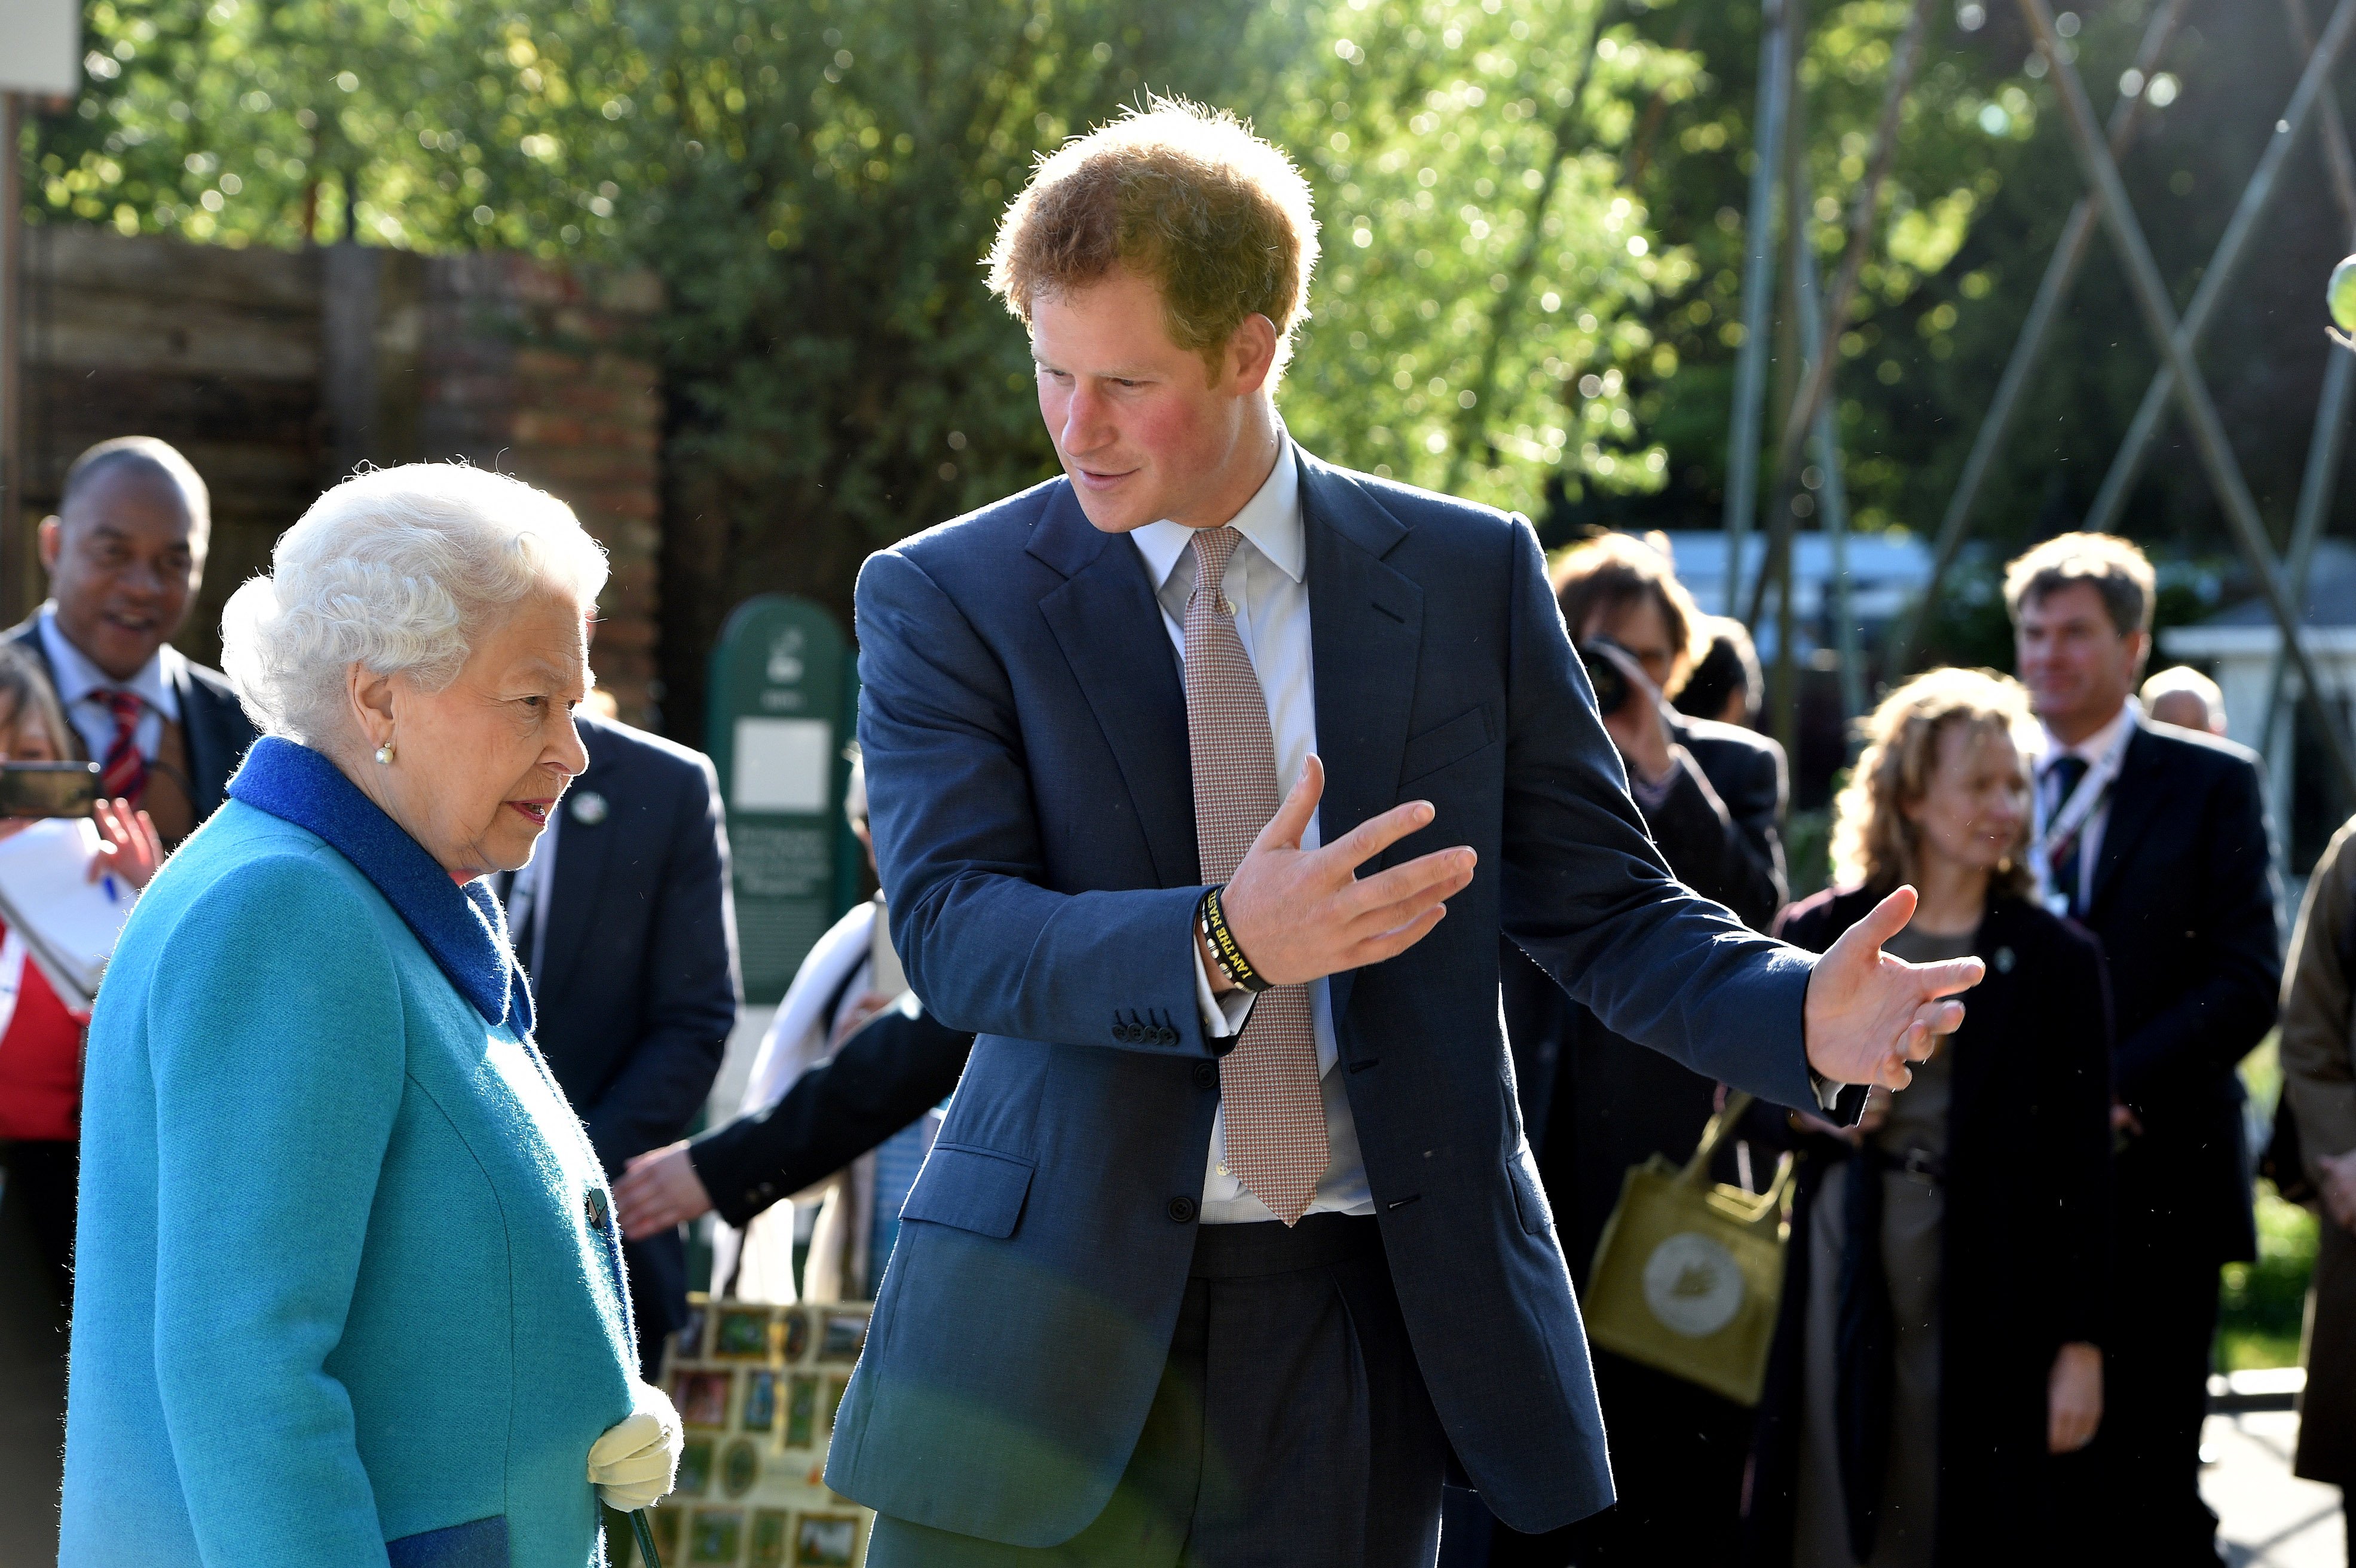 Queen Elizabeth II and Prince Harry attend at the annual Chelsea Flower show at Royal Hospital Chelsea on May 18, 2015 in London, England. | Source: Getty Images